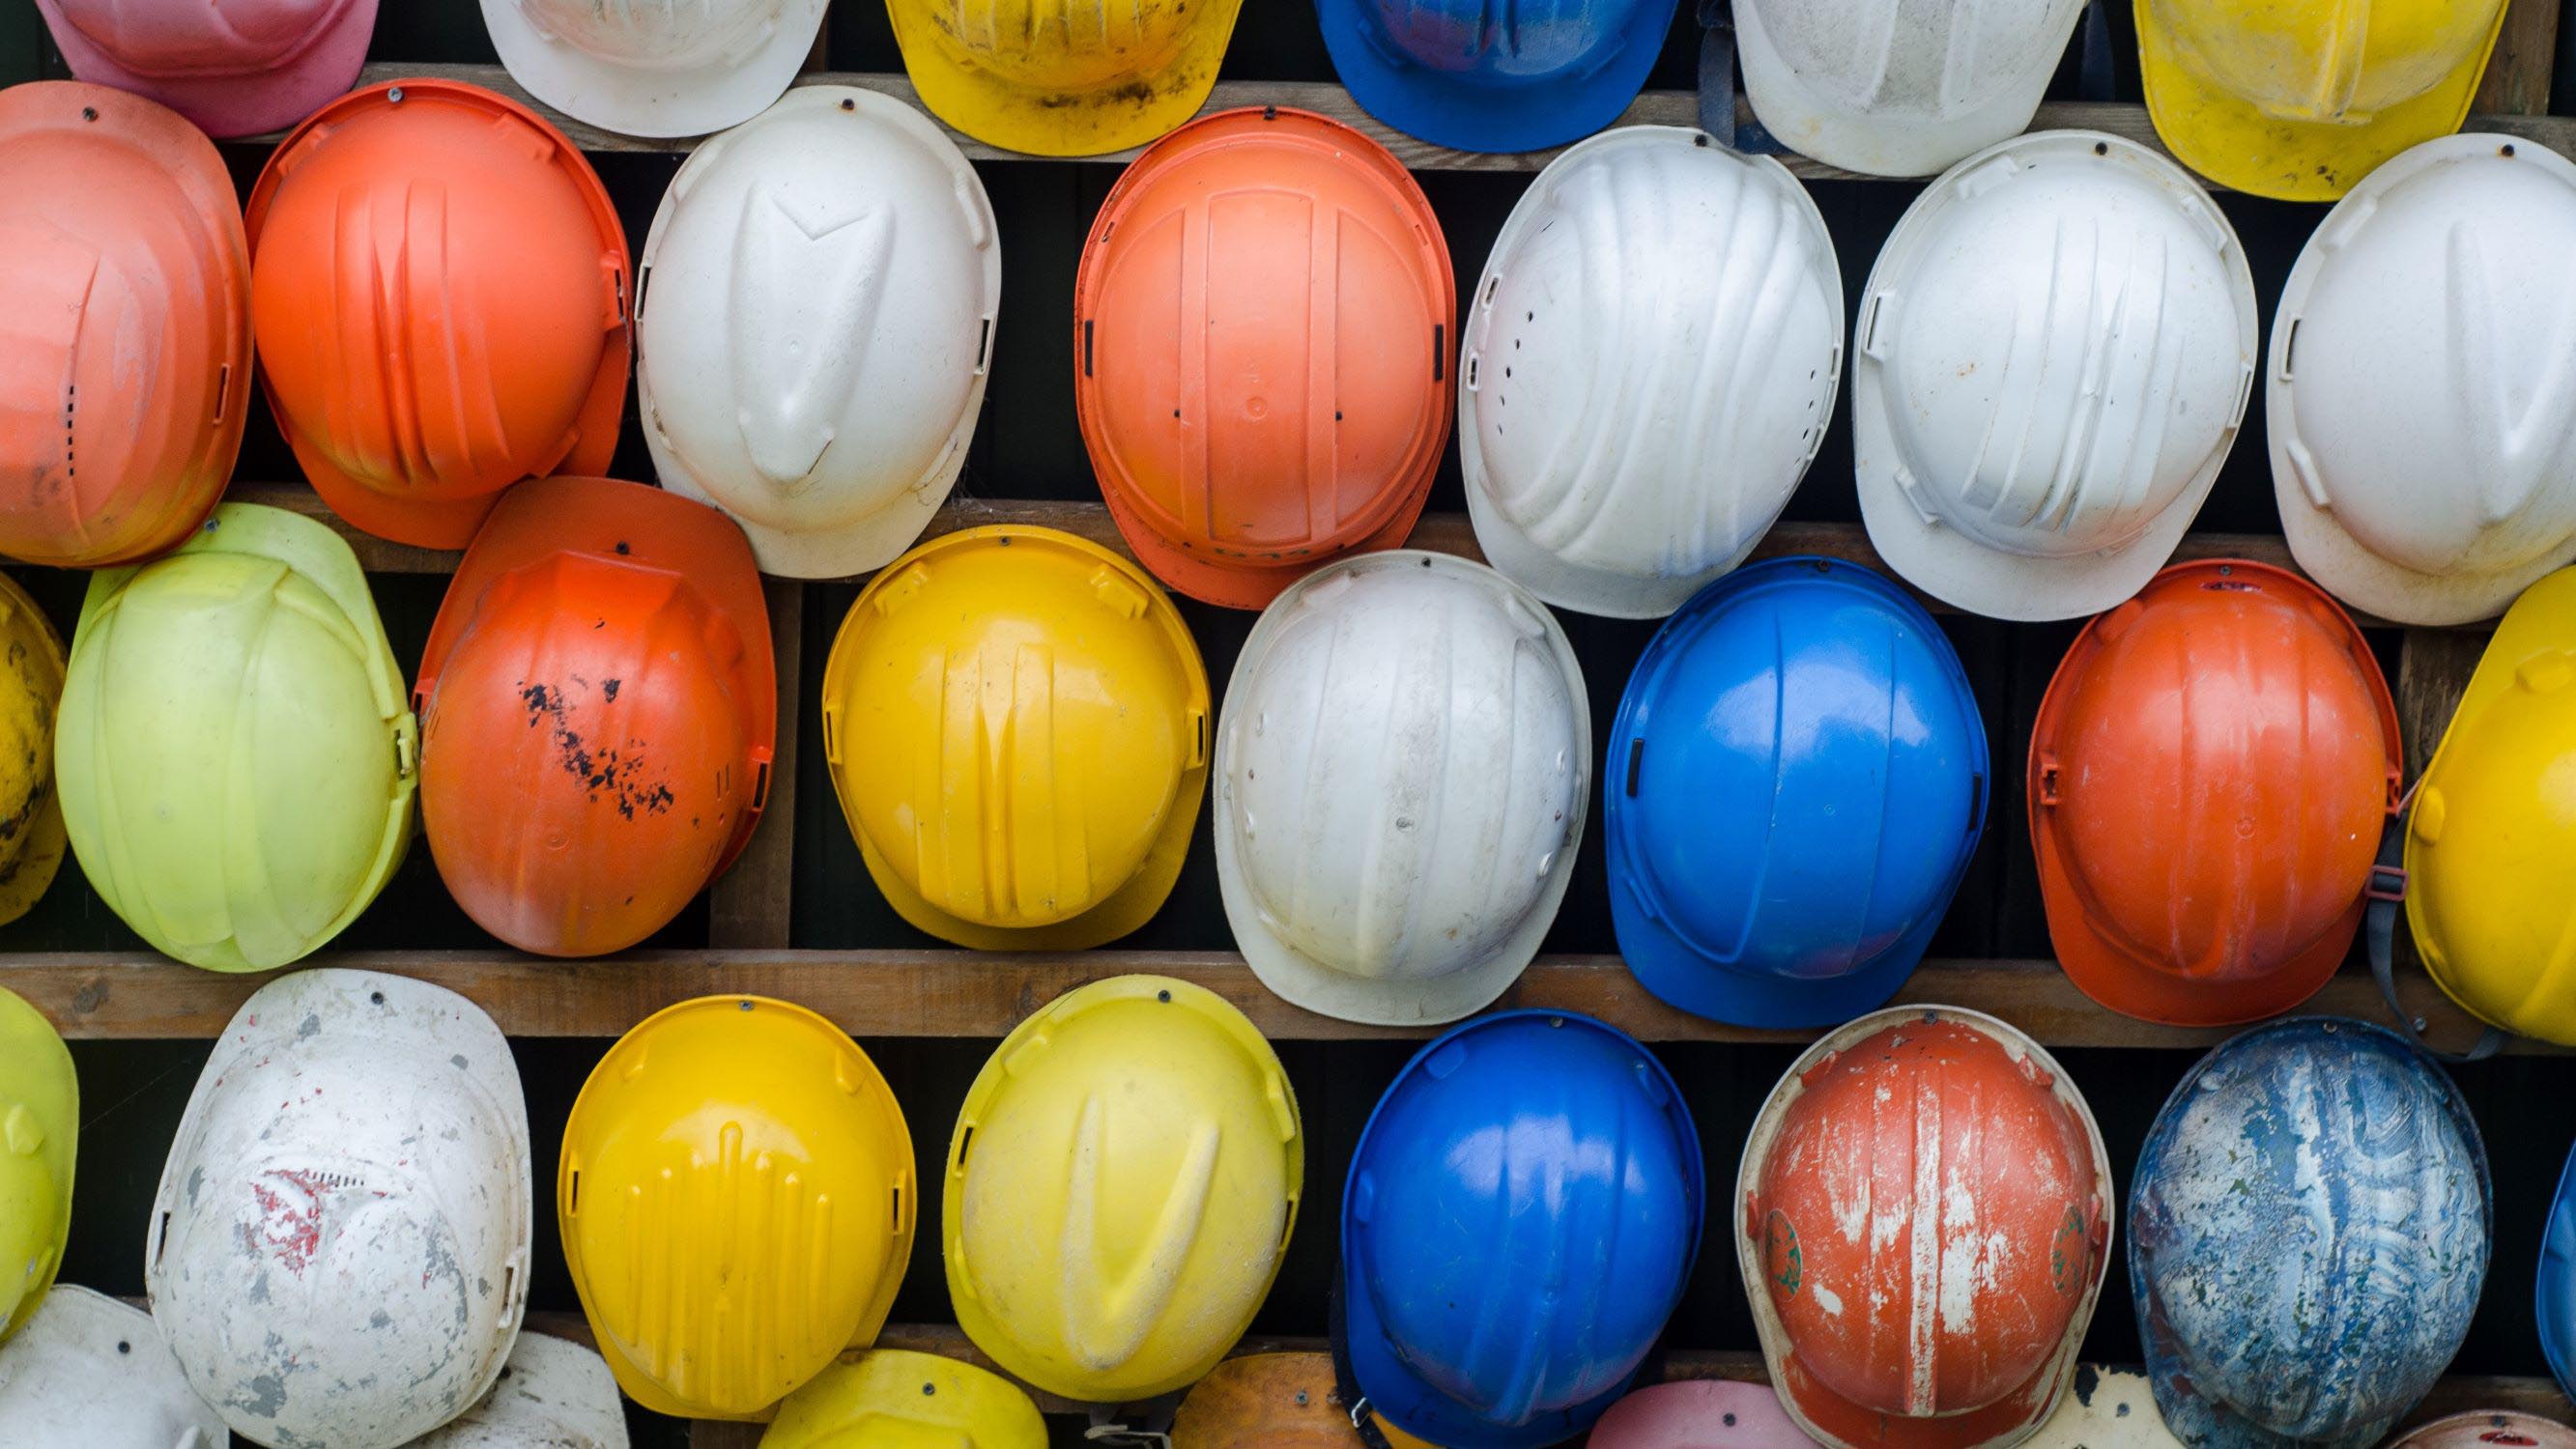 Blue, white, orange, and yellow hardhats hung up on a wooden structure.